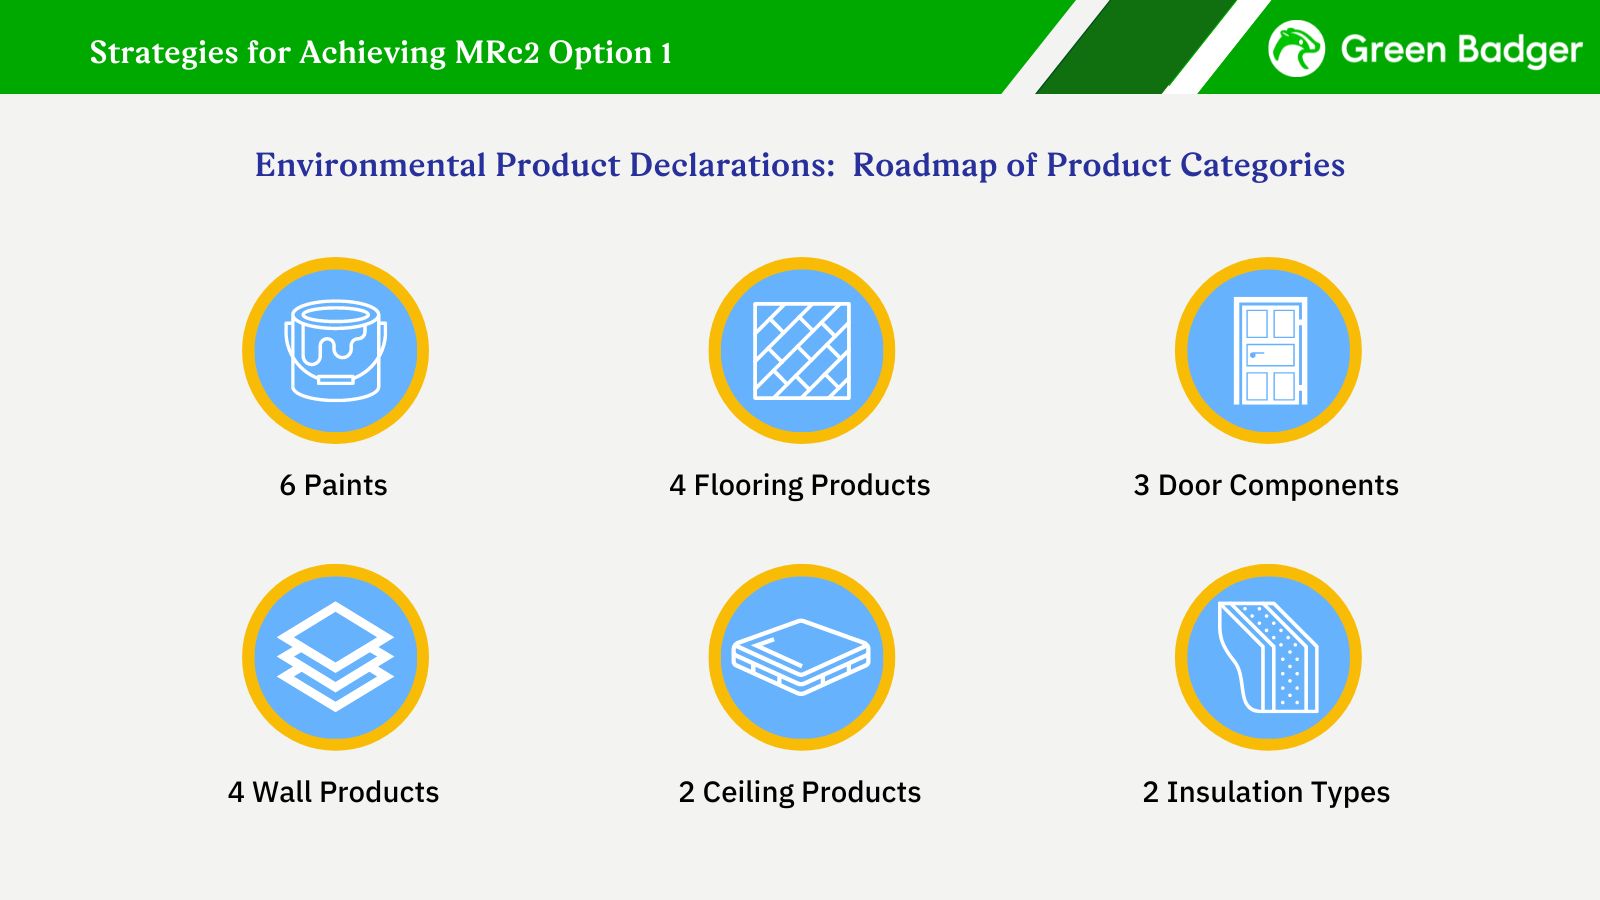 Green Badger's Ultimate Guide to LEED - Strategies for MRc2 Option 2